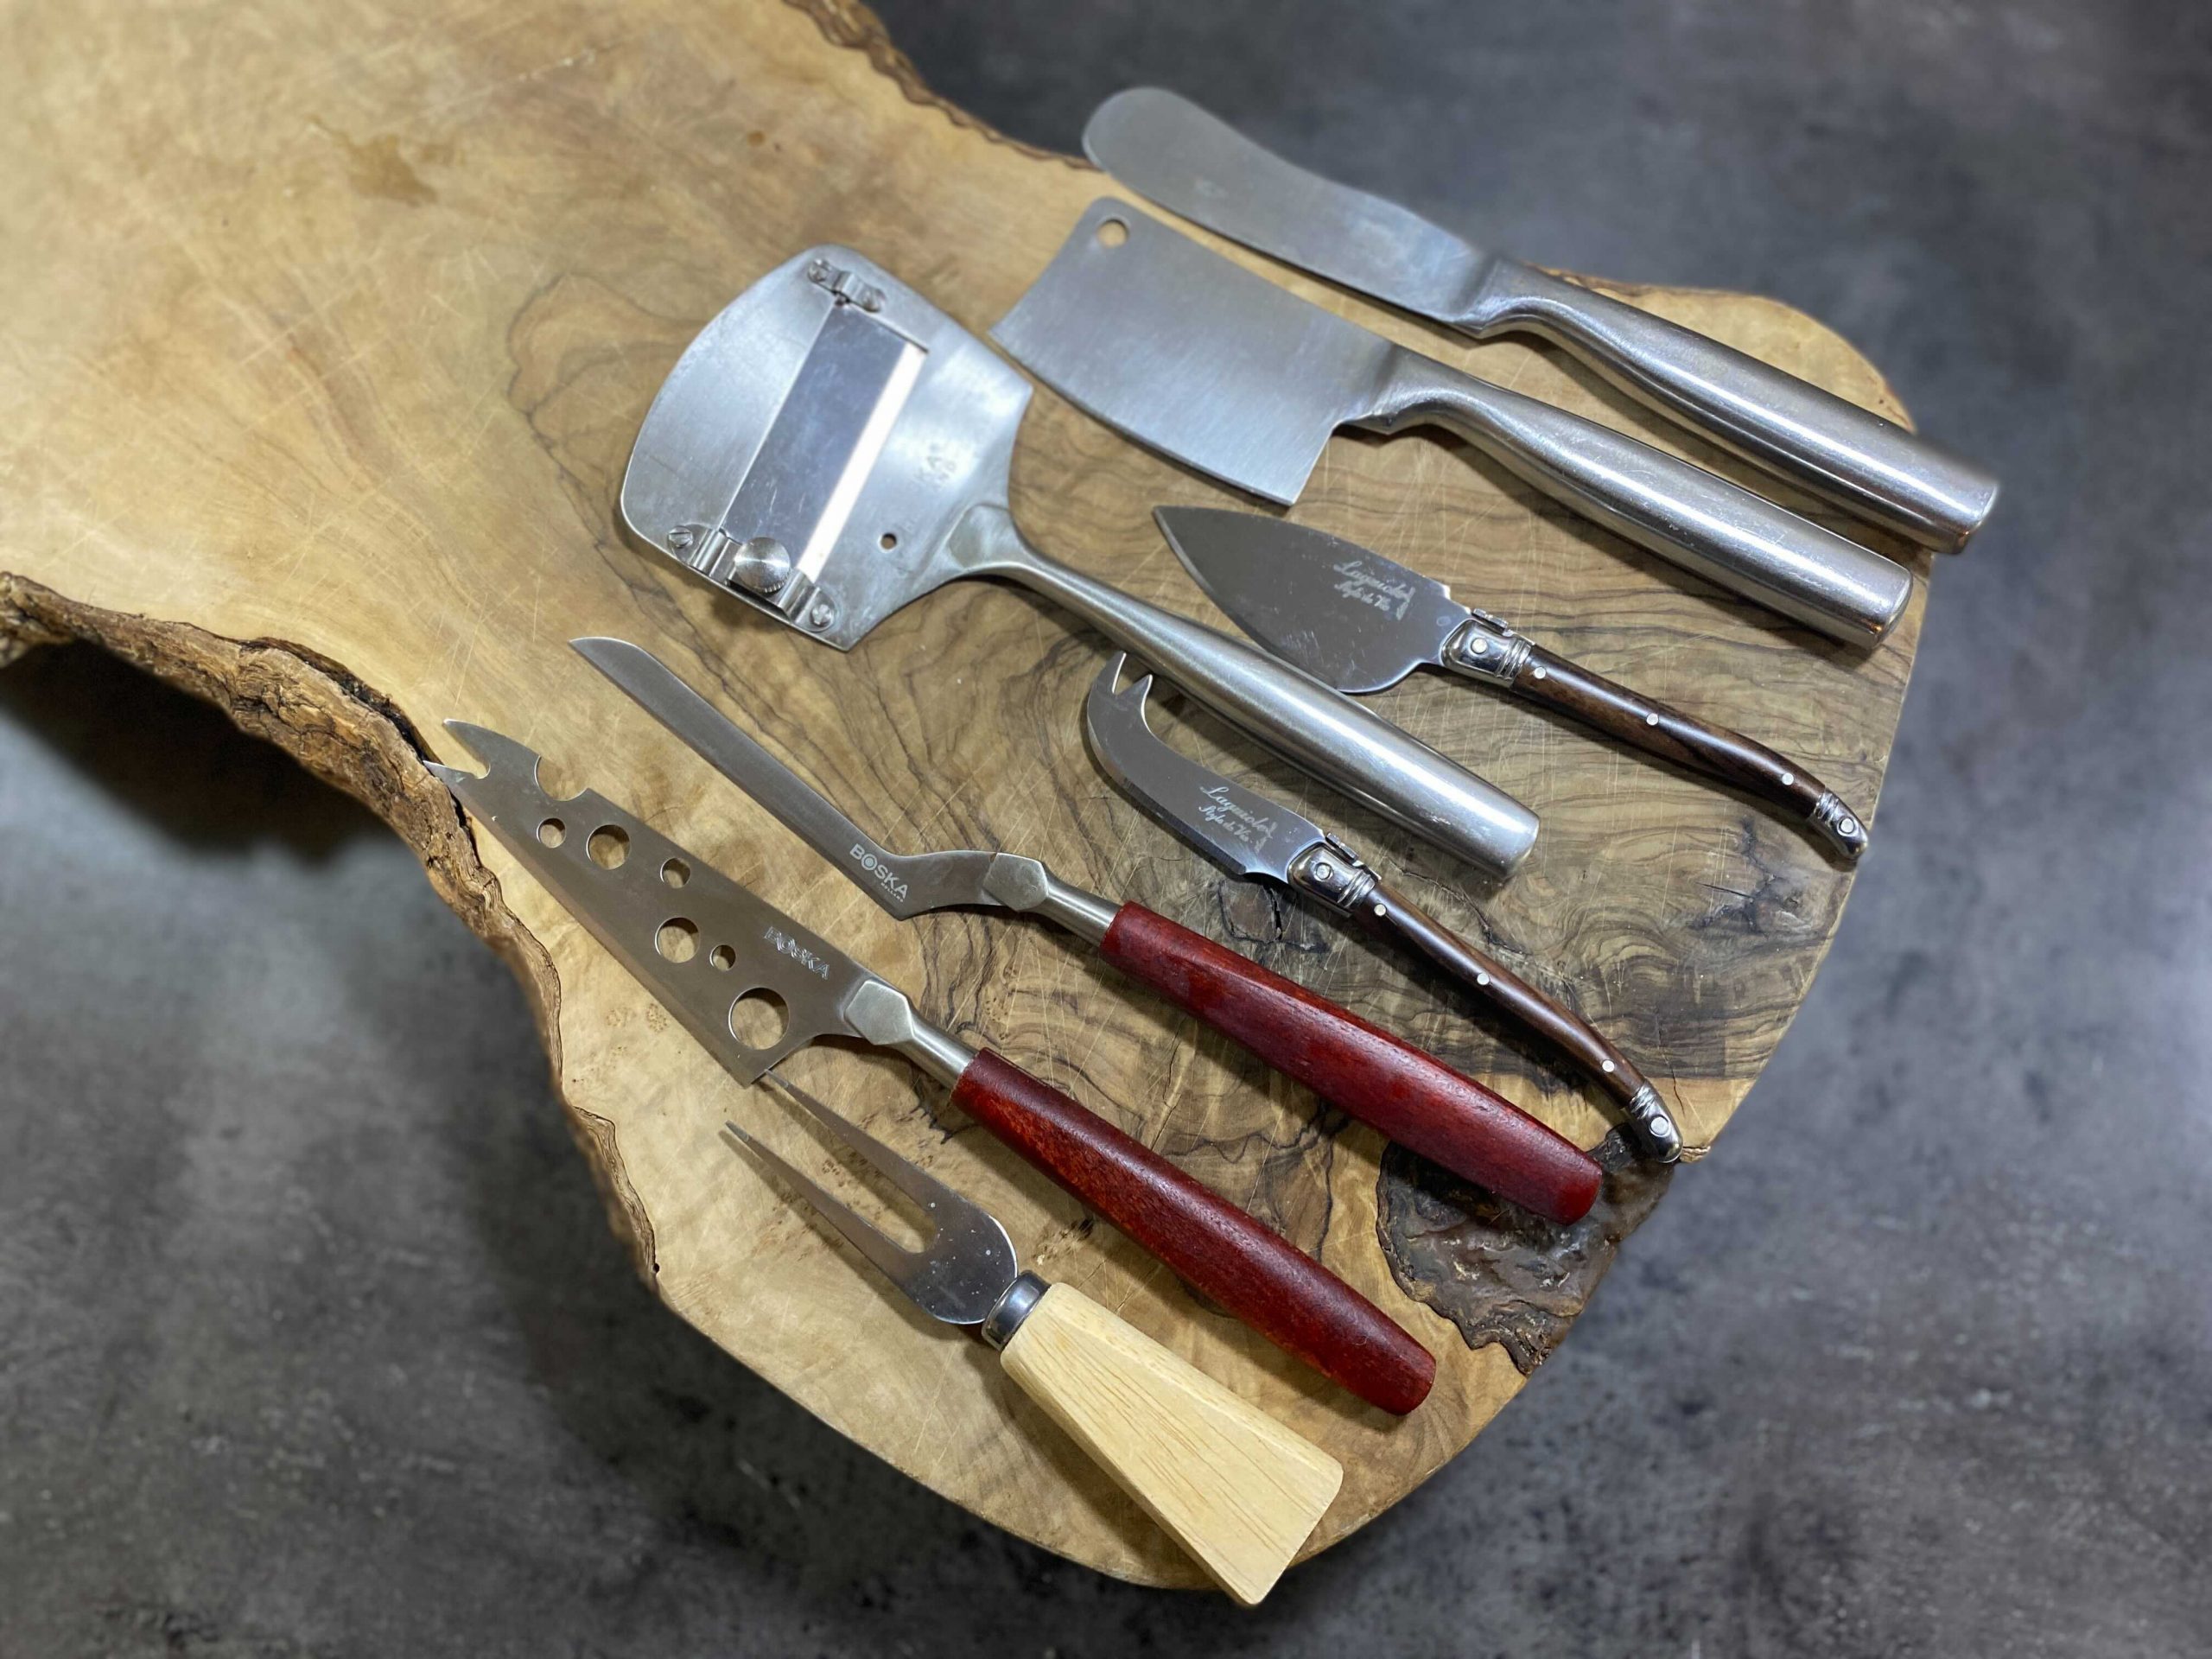 The Ultimate Guide to Cheese Knives: Types, How To Use, Features, & More